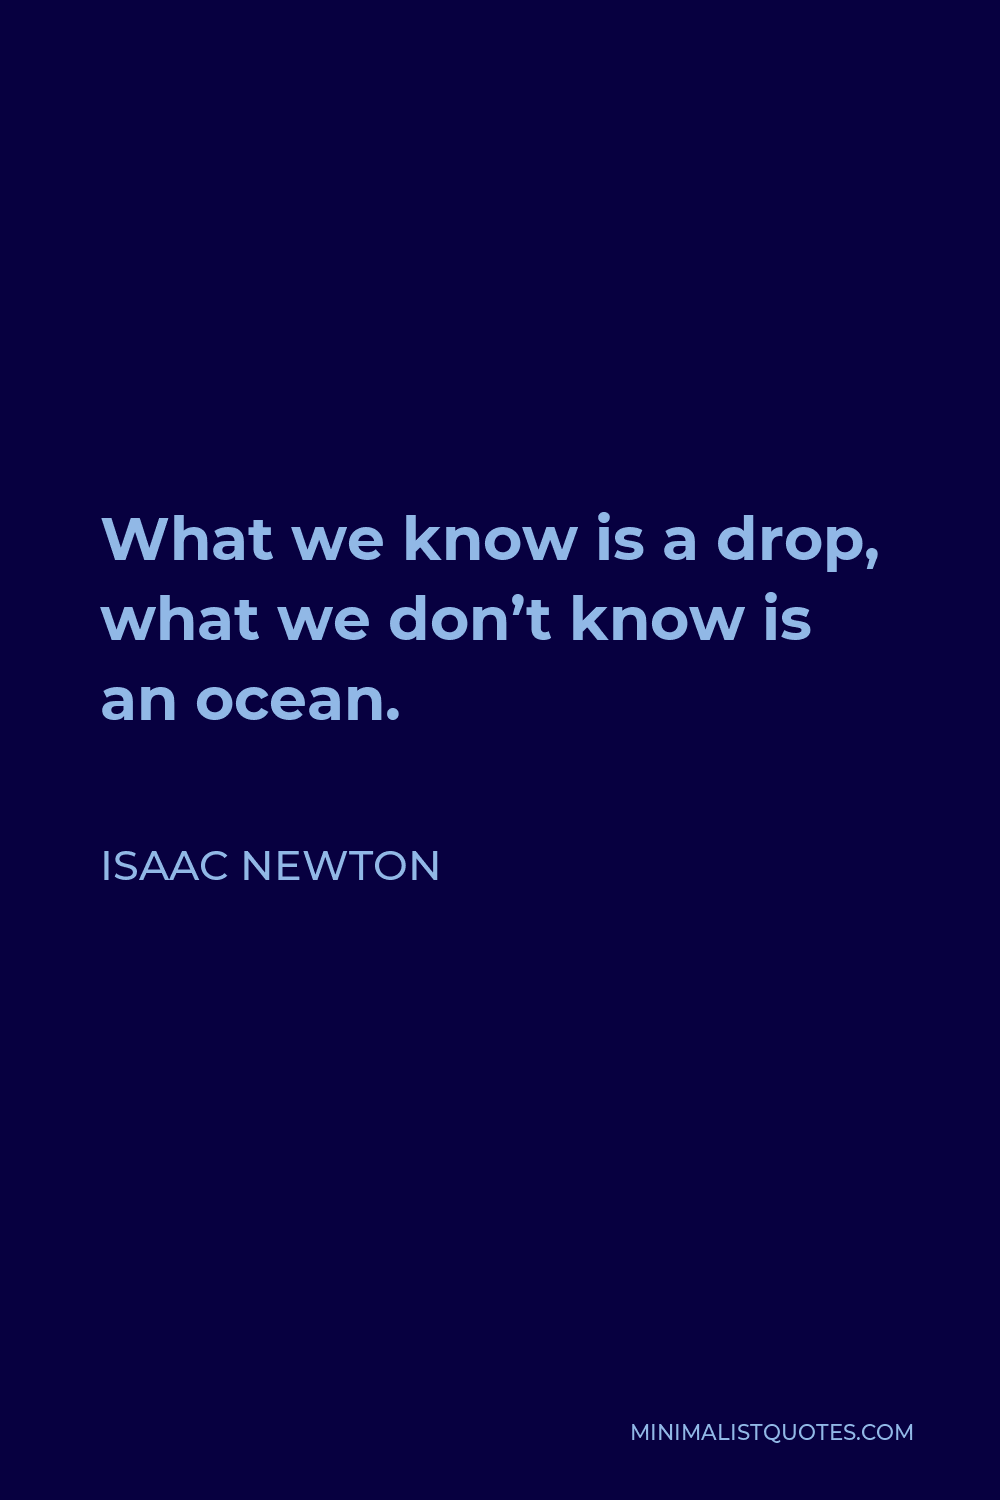 Isaac Newton Quote - What we know is a drop, what we don’t know is an ocean.